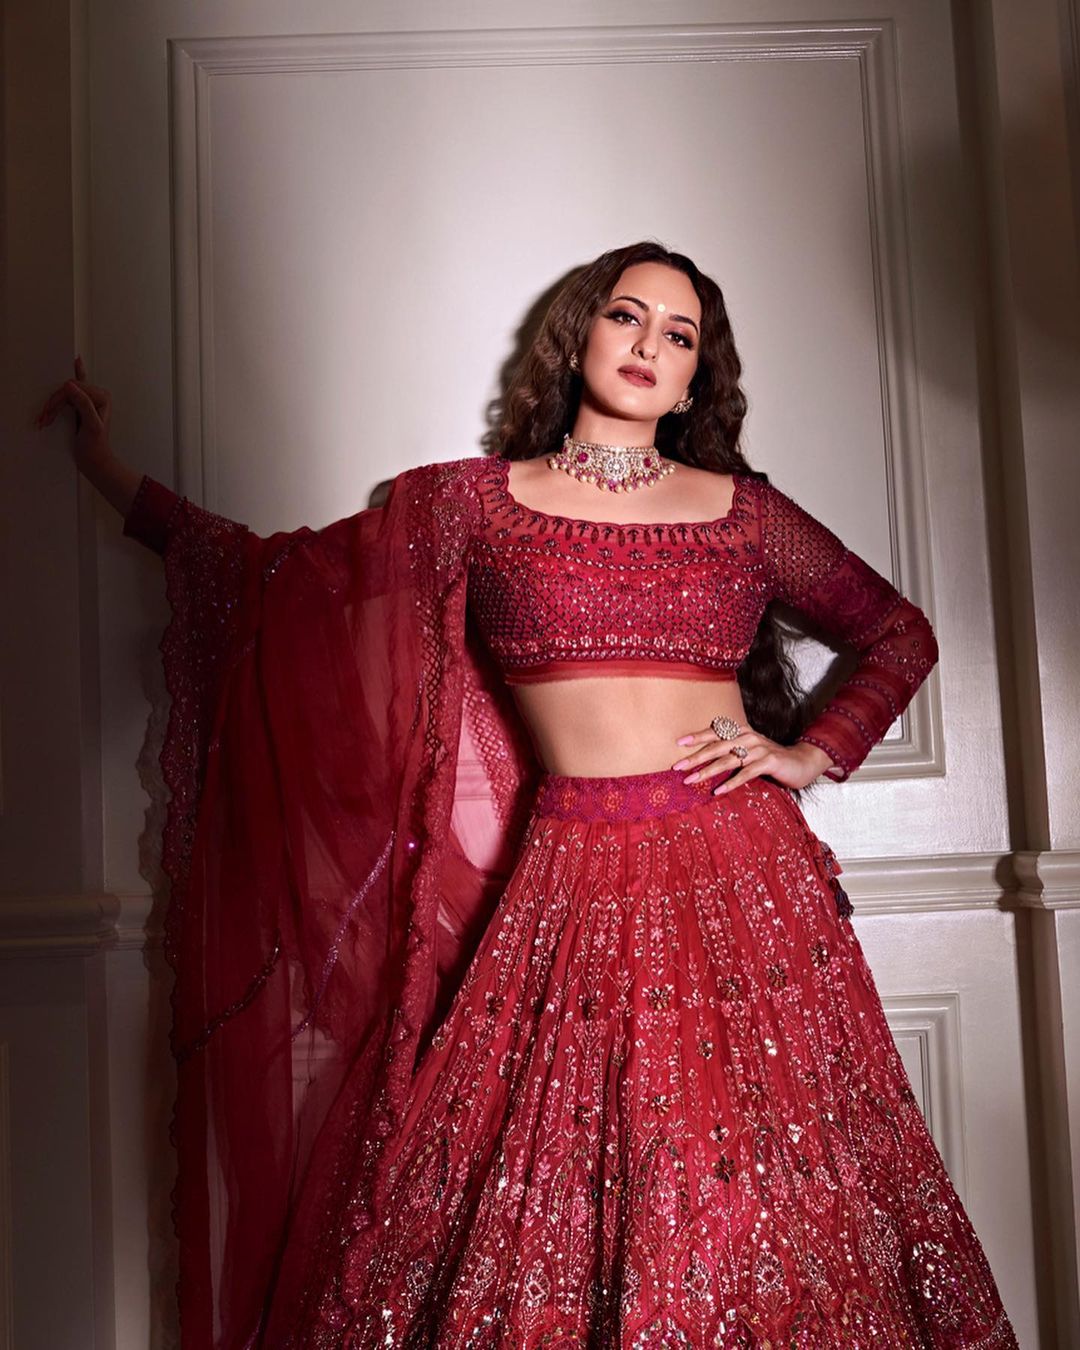 Sonakshi Sinha Stuns In A Bridal Shoot For A Leading Magazine Check Out Her Gorgeous Photos